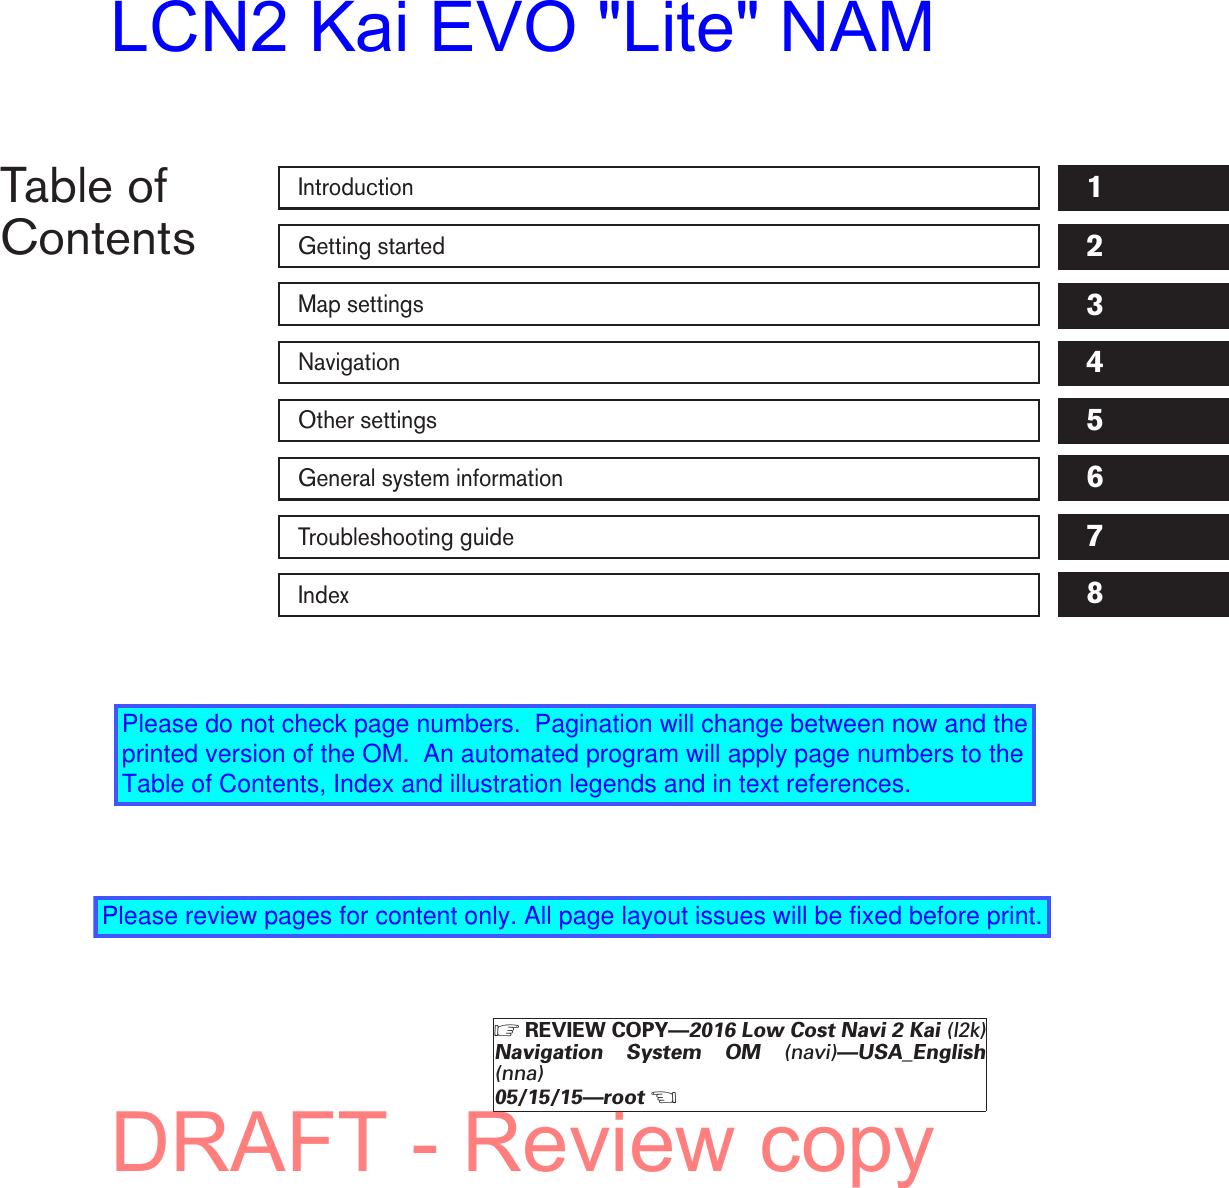 Table ofContentsIntroductionGetting startedMap settingsNavigationOther settingsGeneral system informationTroubleshooting guideIndex12345678੬REVIEW COPY—2016 Low Cost Navi 2 Kai (l2k)Navigation System OM (navi)—USA_English(nna)05/15/15—root੭DRAFT - Review copyLCN2 Kai EVO &quot;Lite&quot; NAMPlease do not check page numbers.  Pagination will change between now and the printed version of the OM.  An automated program will apply page numbers to the Table of Contents, Index and illustration legends and in text references.Please review pages for content only. All page layout issues will be fixed before print.